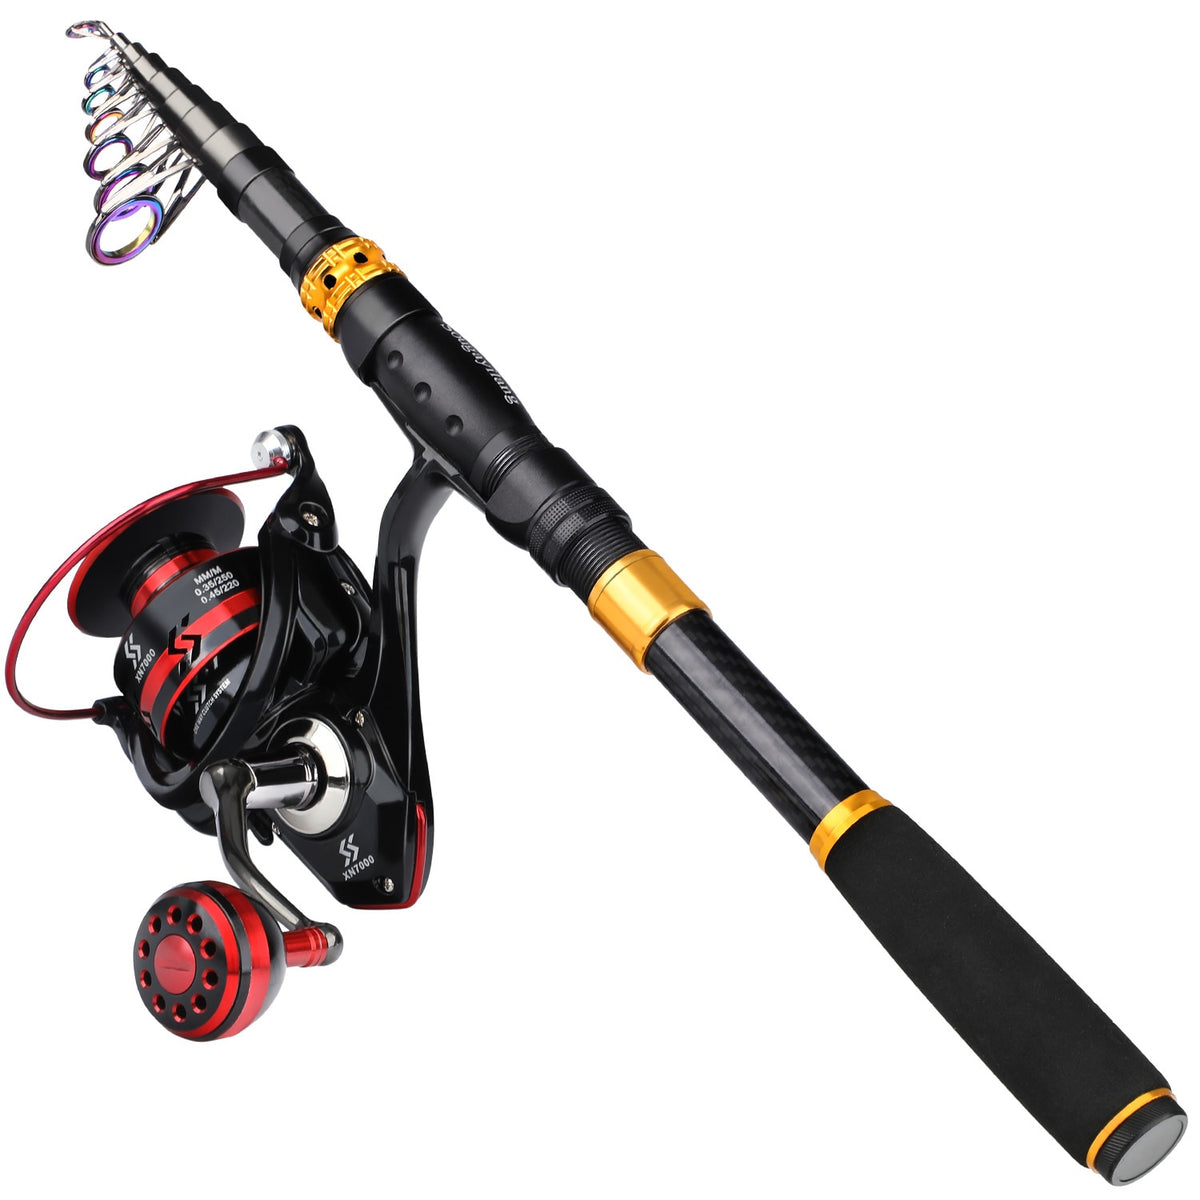 Fishing Rod and Reel Set 1.8-3.3 Telescopic Fishing Rods and Spinning Reel  Combos LY7006